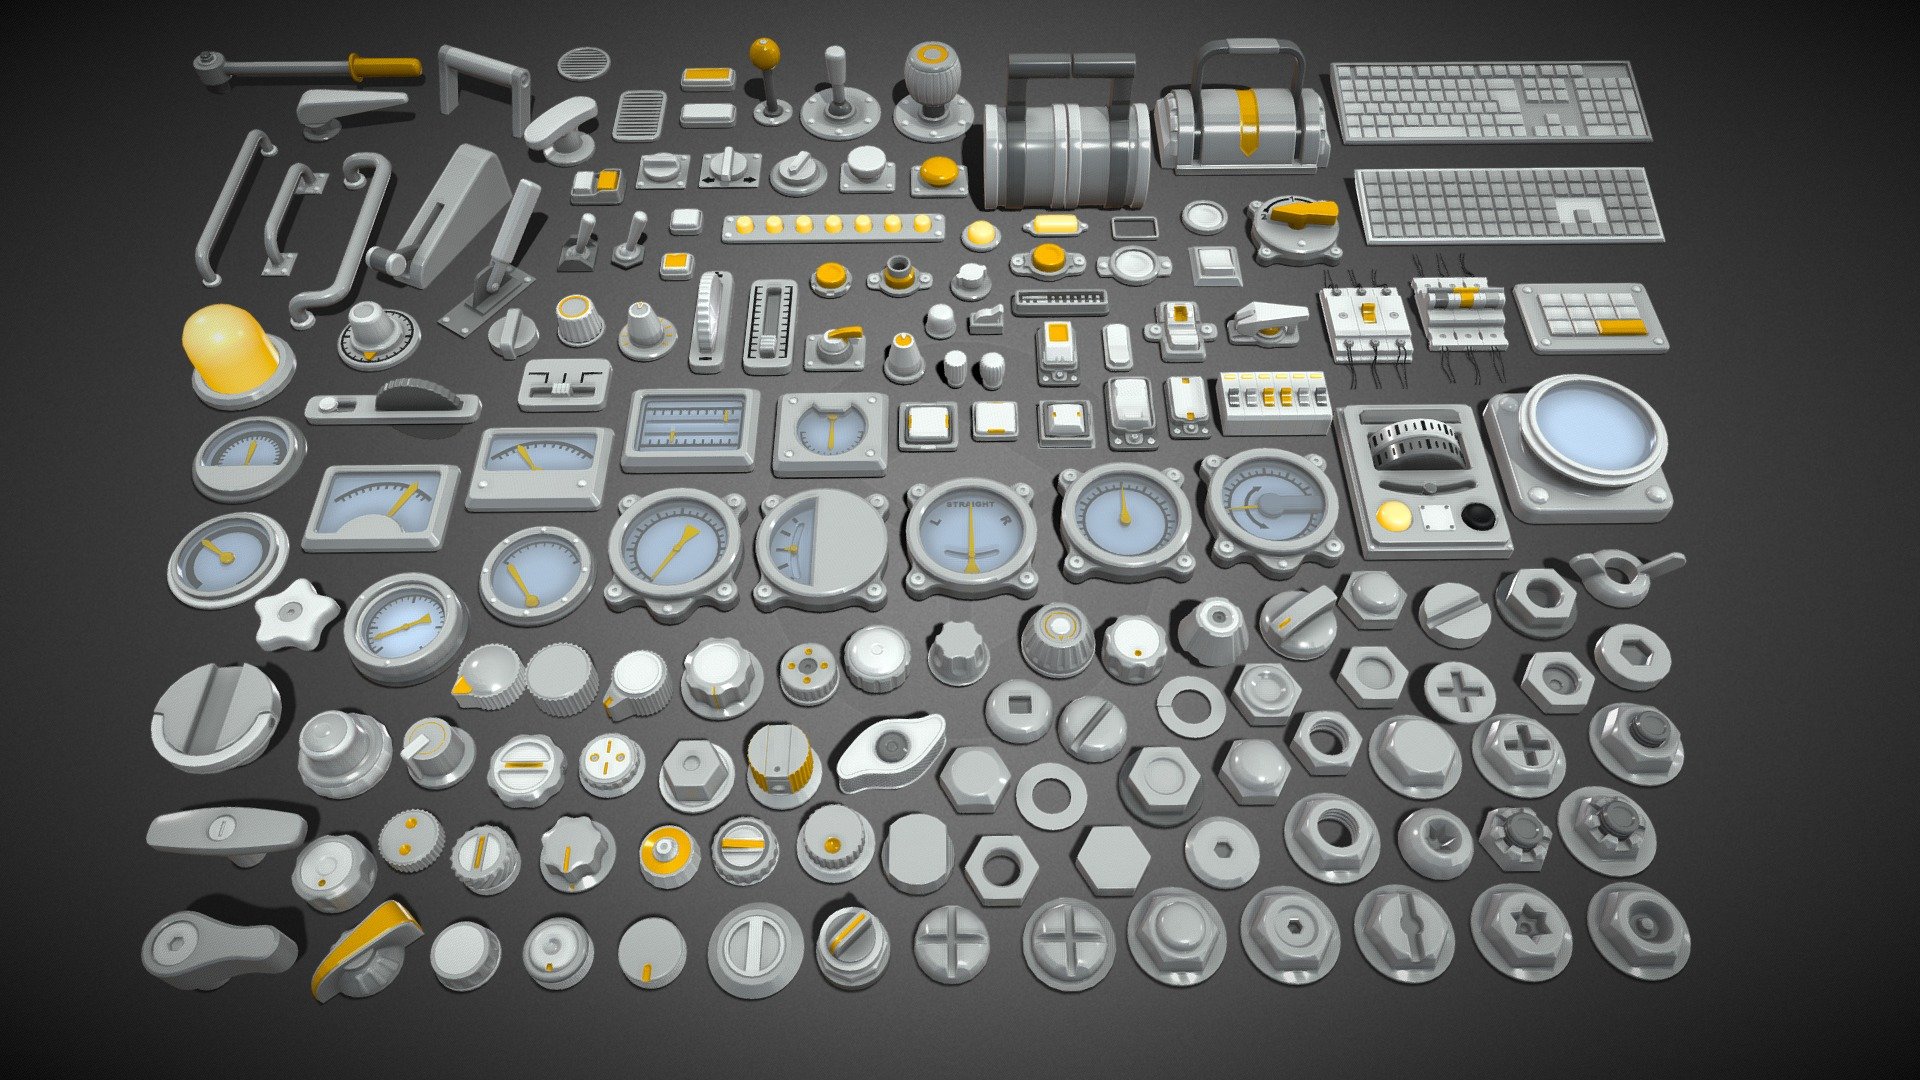 Get pack - https://www.artstation.com/a/31256171

156 low/middle poly industrial kitbashes




clean and close meshes (97% quad poly)

material ID

Real size

NO subdiv , NO textures , NO groups , NO UV map

include max(2020), blend(3.5) , fbx and obj files 



poly - 138993
vert - 125812 - Industrial Kitbash - 9 - 156 pieces - 3D model by 3d.armzep 3d model